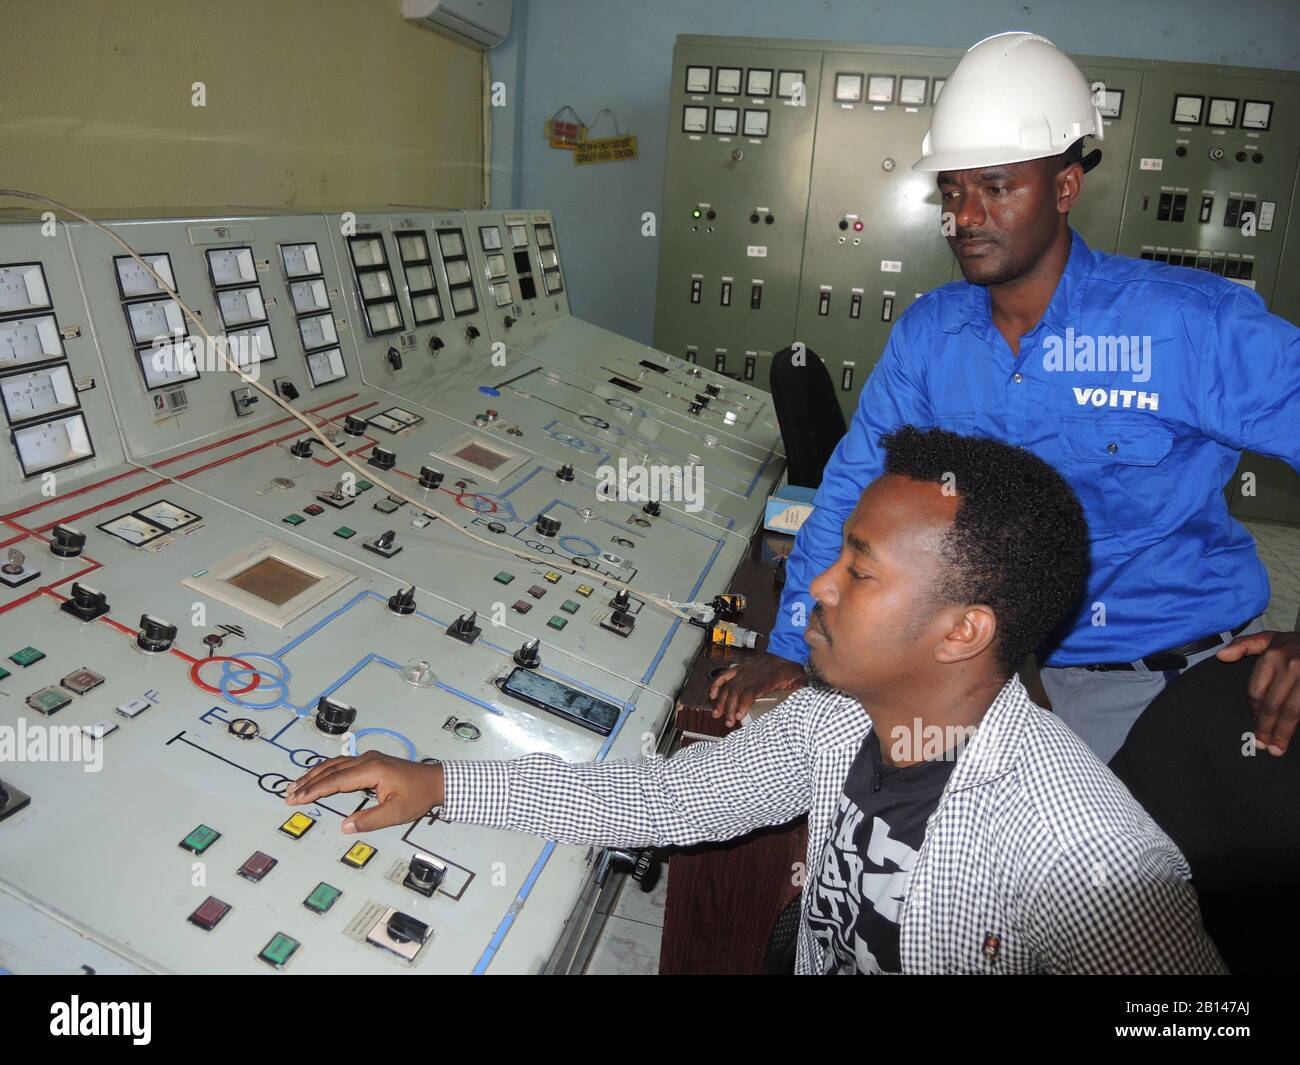 Koka Wasserkraftwerk, Ethiopia. 21st Jan, 2020. Electrical engineer Sisey Hussein (front) and Voith expert Mulugeta Mitiku work at the control panel of the coca water power station in Ethiopia. (to dpa: 'Powerhouse instead of hunger country - southwest shows the flag in Ethiopia') Credit: Thomas Burmeister/dpa/Alamy Live News Stock Photo